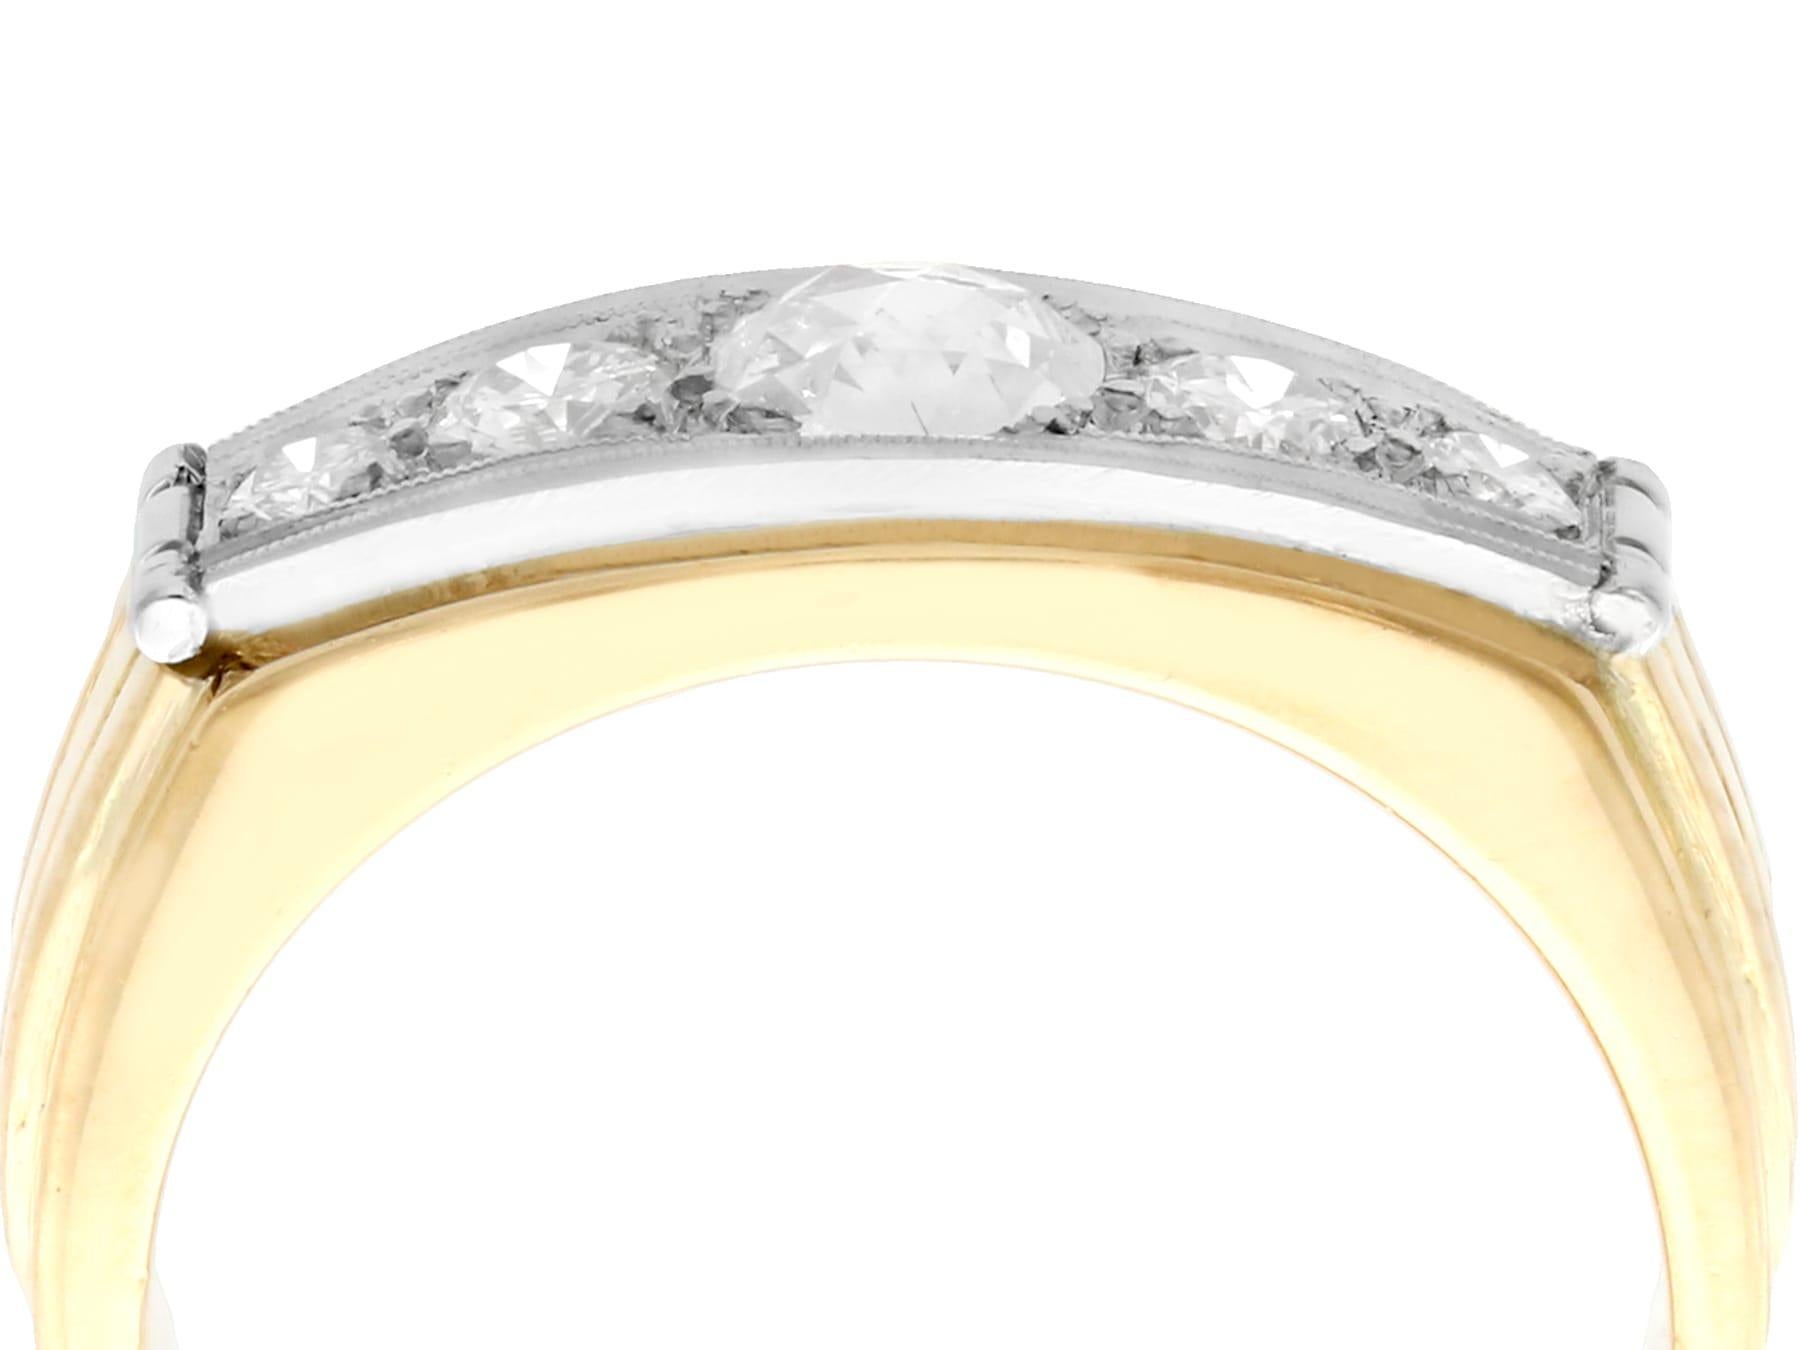 An impressive vintage 0.68 Ct diamond and 18k yellow gold, 18k white gold dress ring; part of our diverse diamond jewelry collections.

This fine and impressive 18k gold diamond band ring has been crafted in 18k yellow gold with an 18k white gold